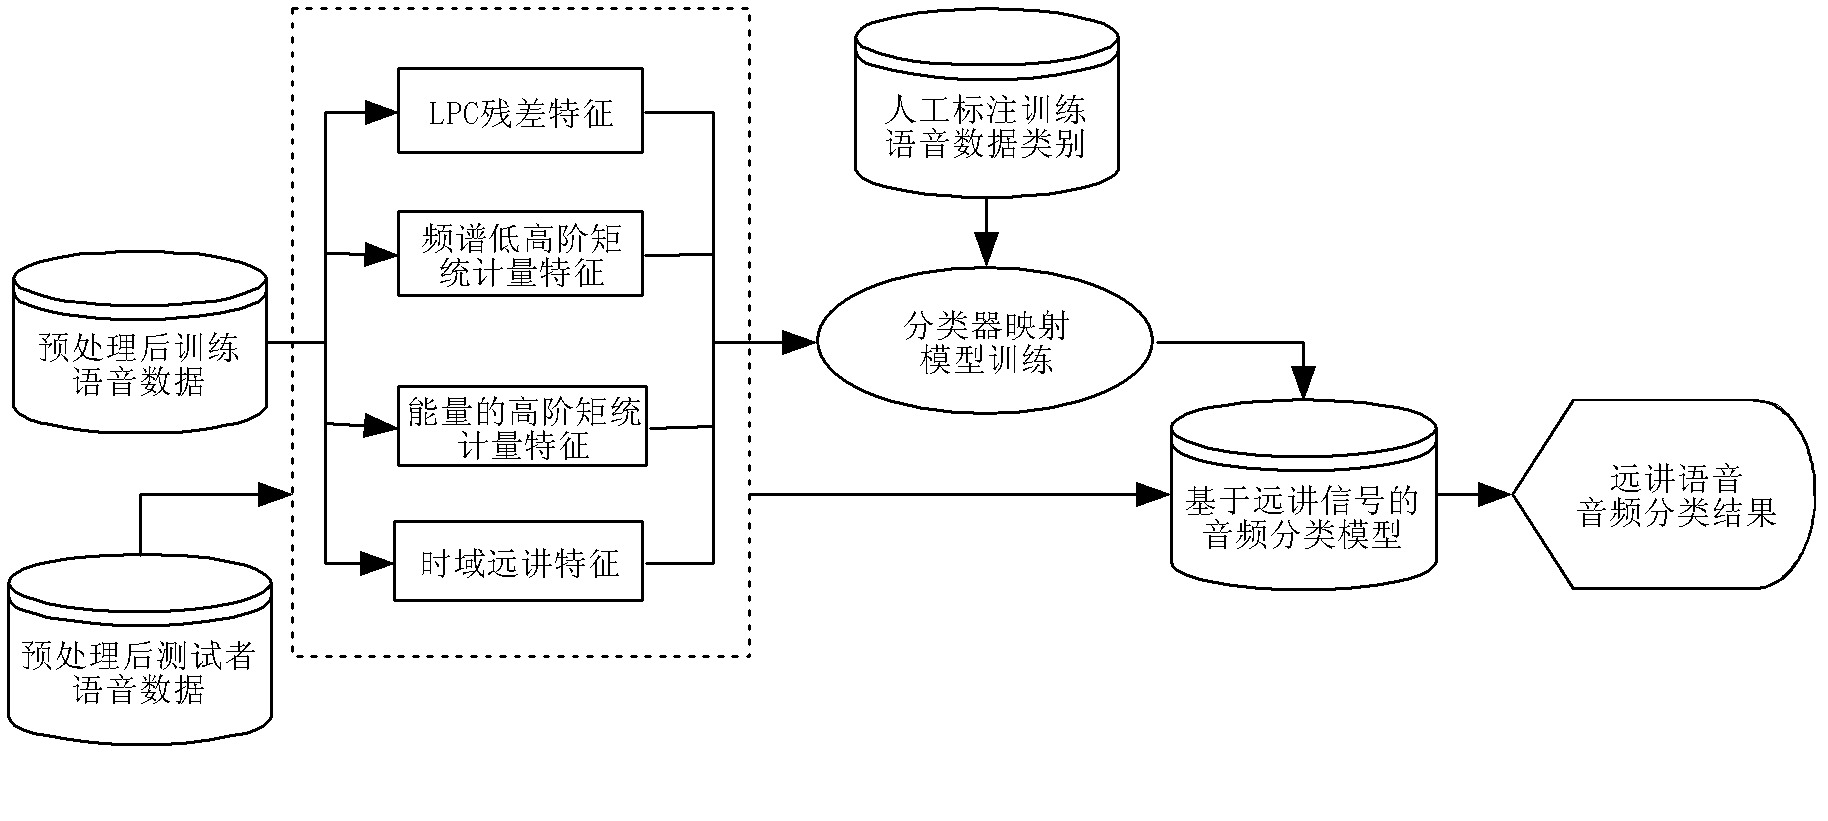 Method and system for detecting abnormal use of voice input equipment